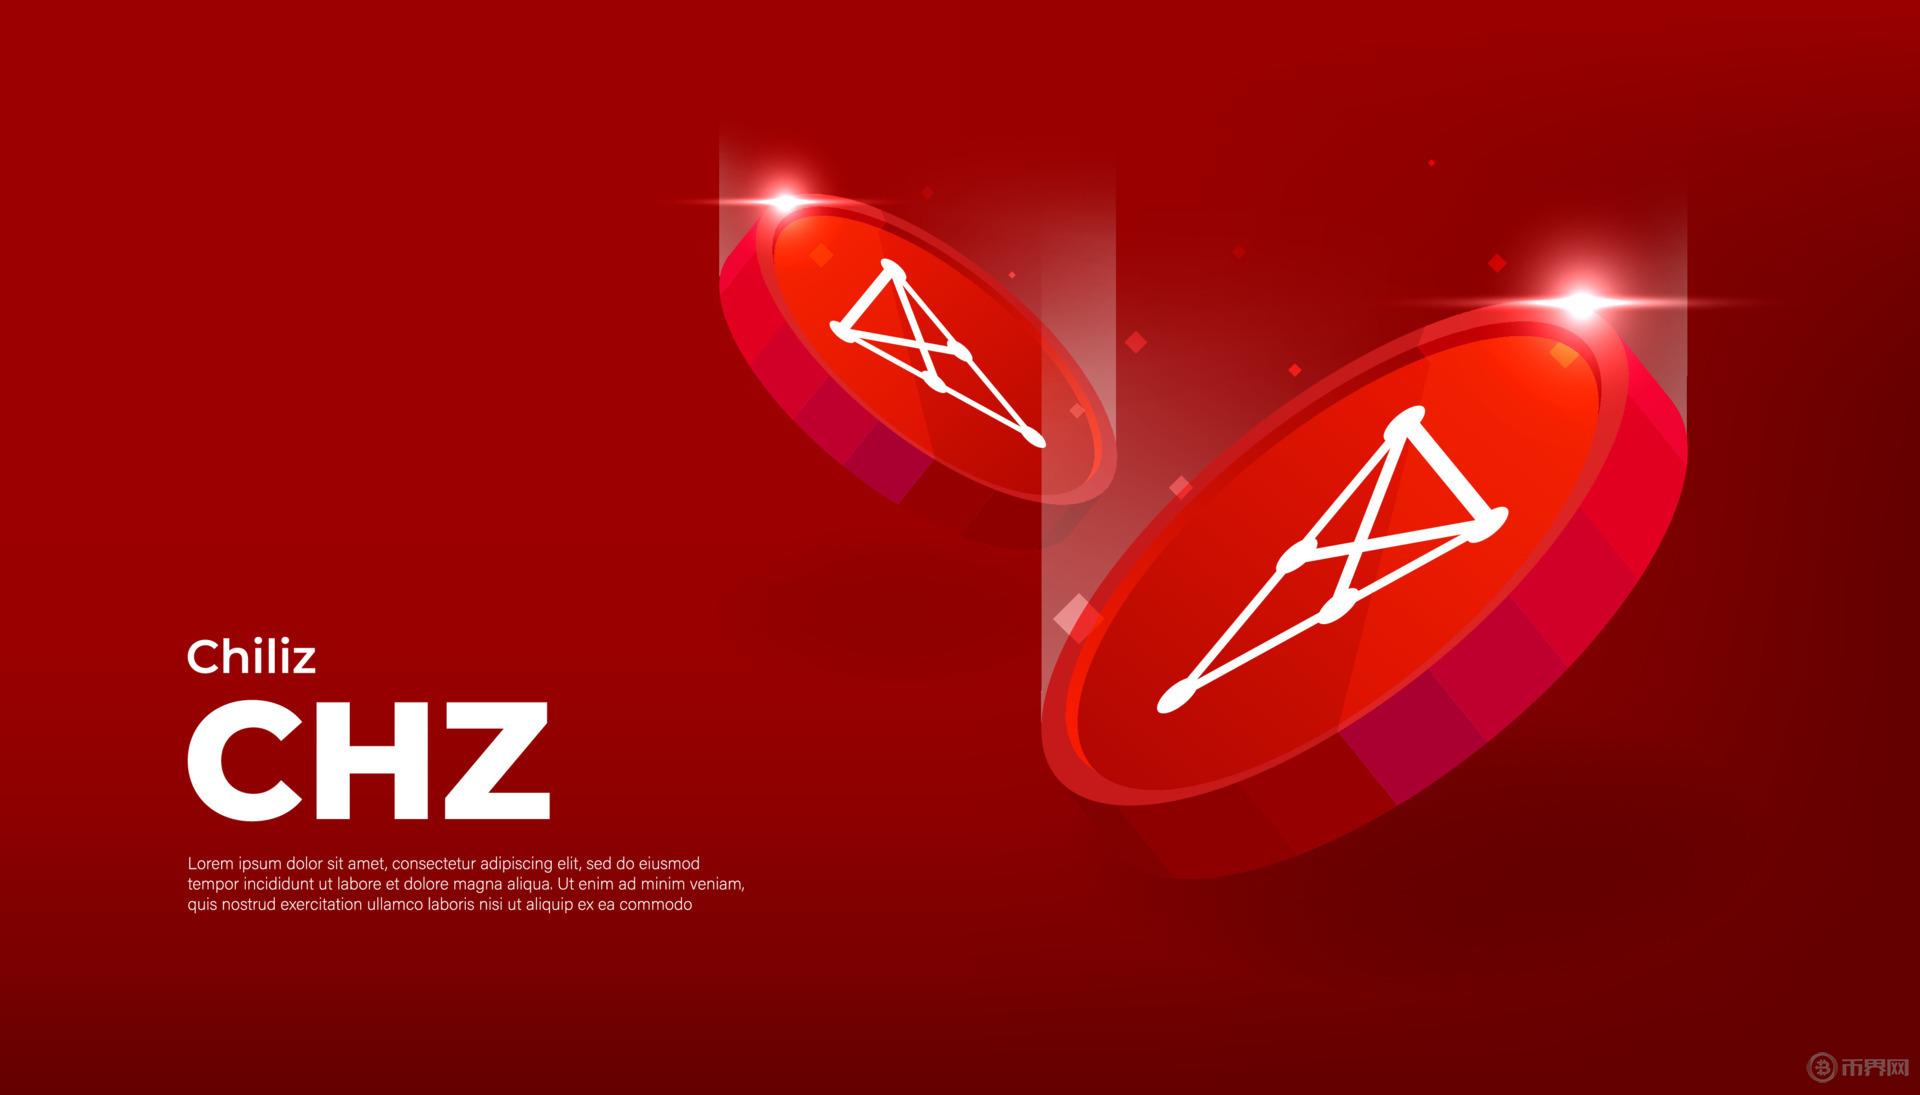 chiliz-chz-coin-cryptocurrency-concept-banner-background-vector.jpg